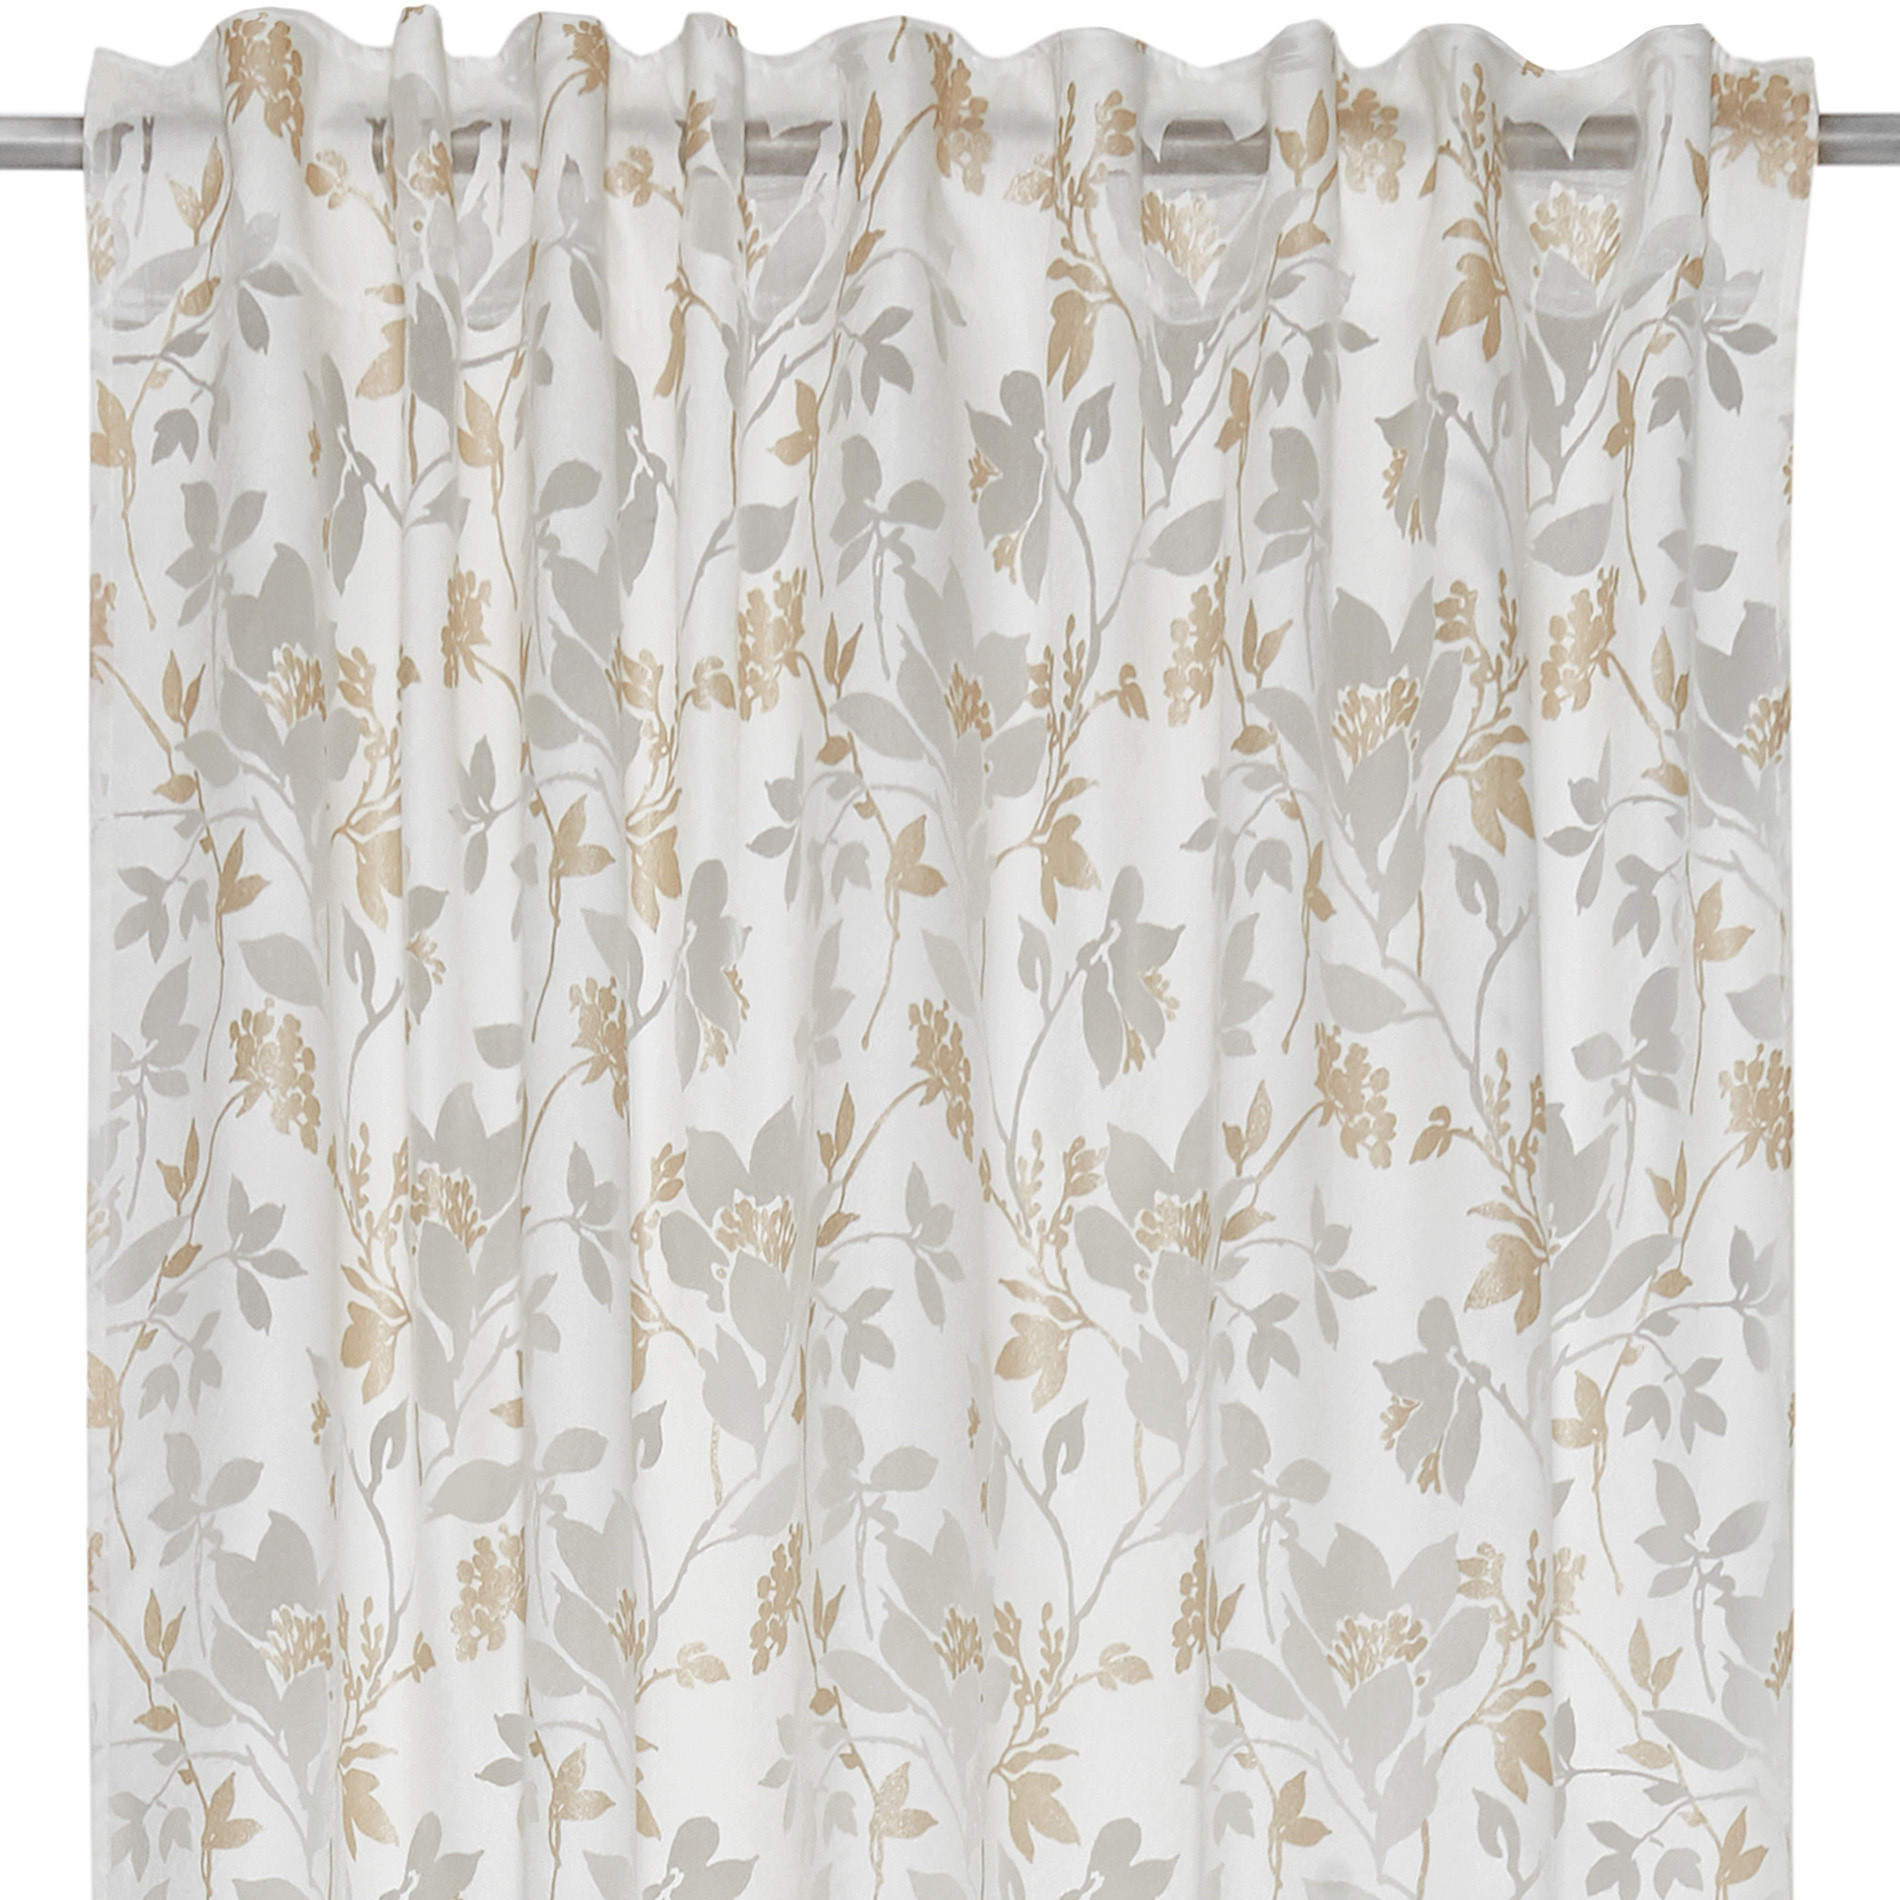 Curtain mixed viscose devore hidden loops, White, large image number 3